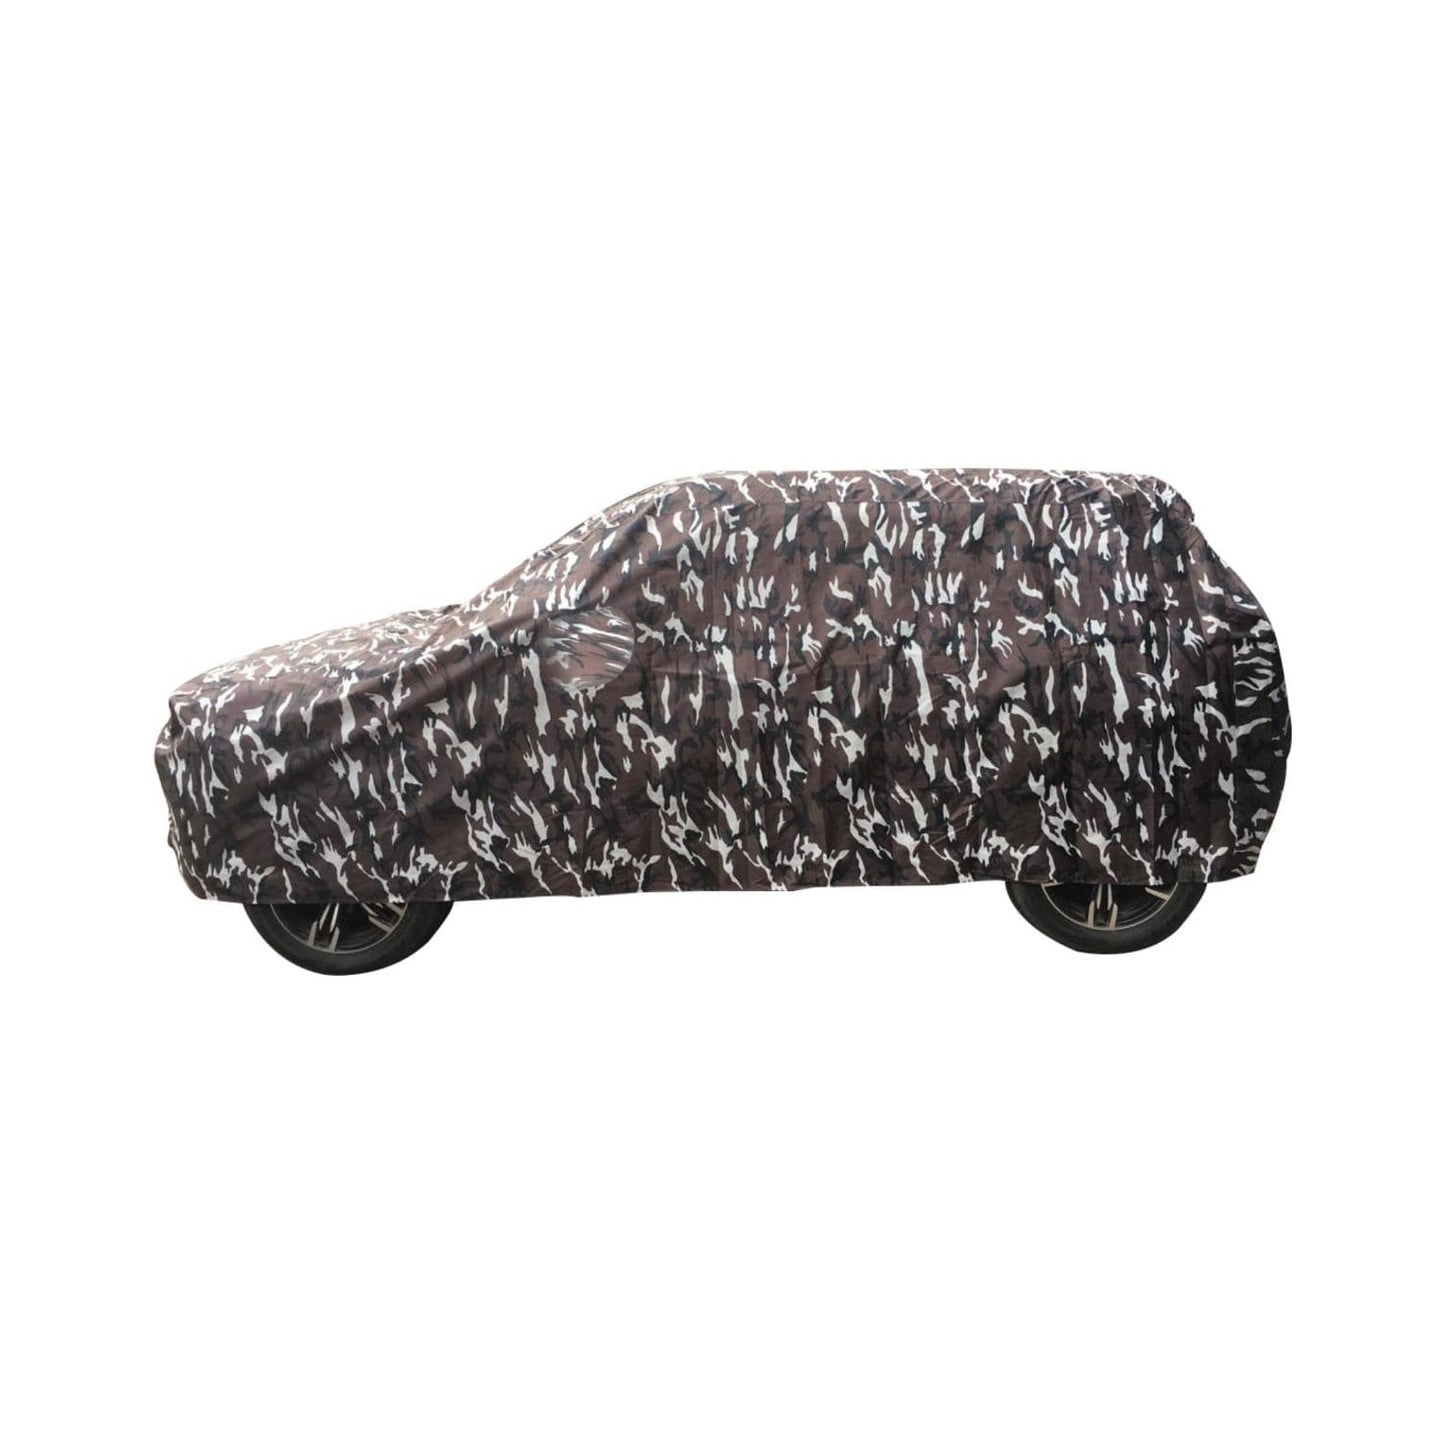 Oshotto Ranger Design Made of 100% Waterproof Fabric Multicolor Car Body Cover with Mirror Pockets For Tata Harrier